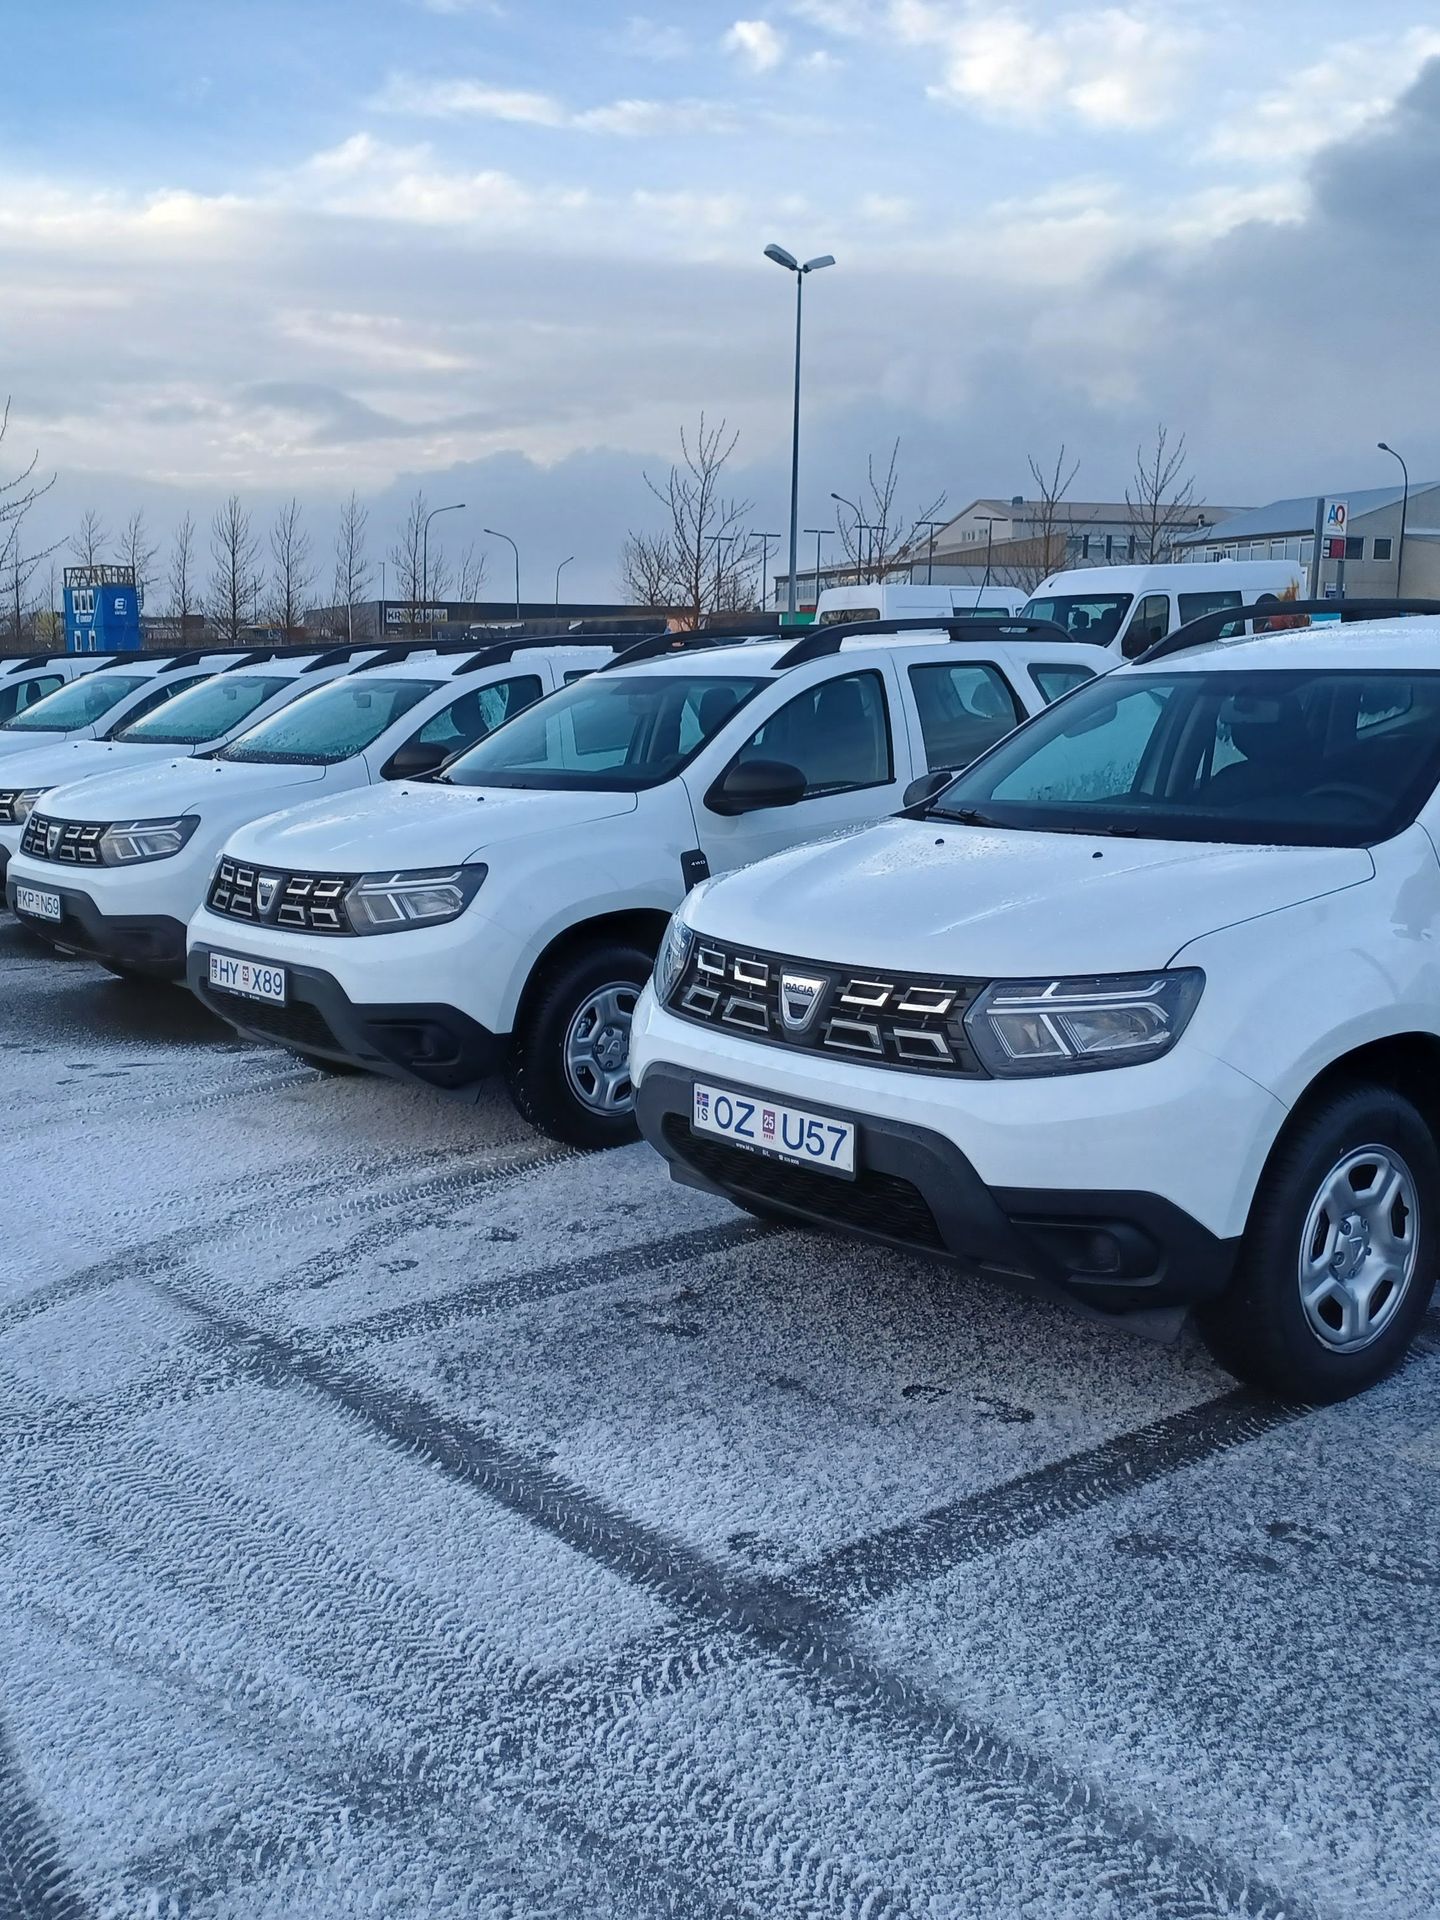 White Dacia Duster 4x4 rental cars parked in Iceland